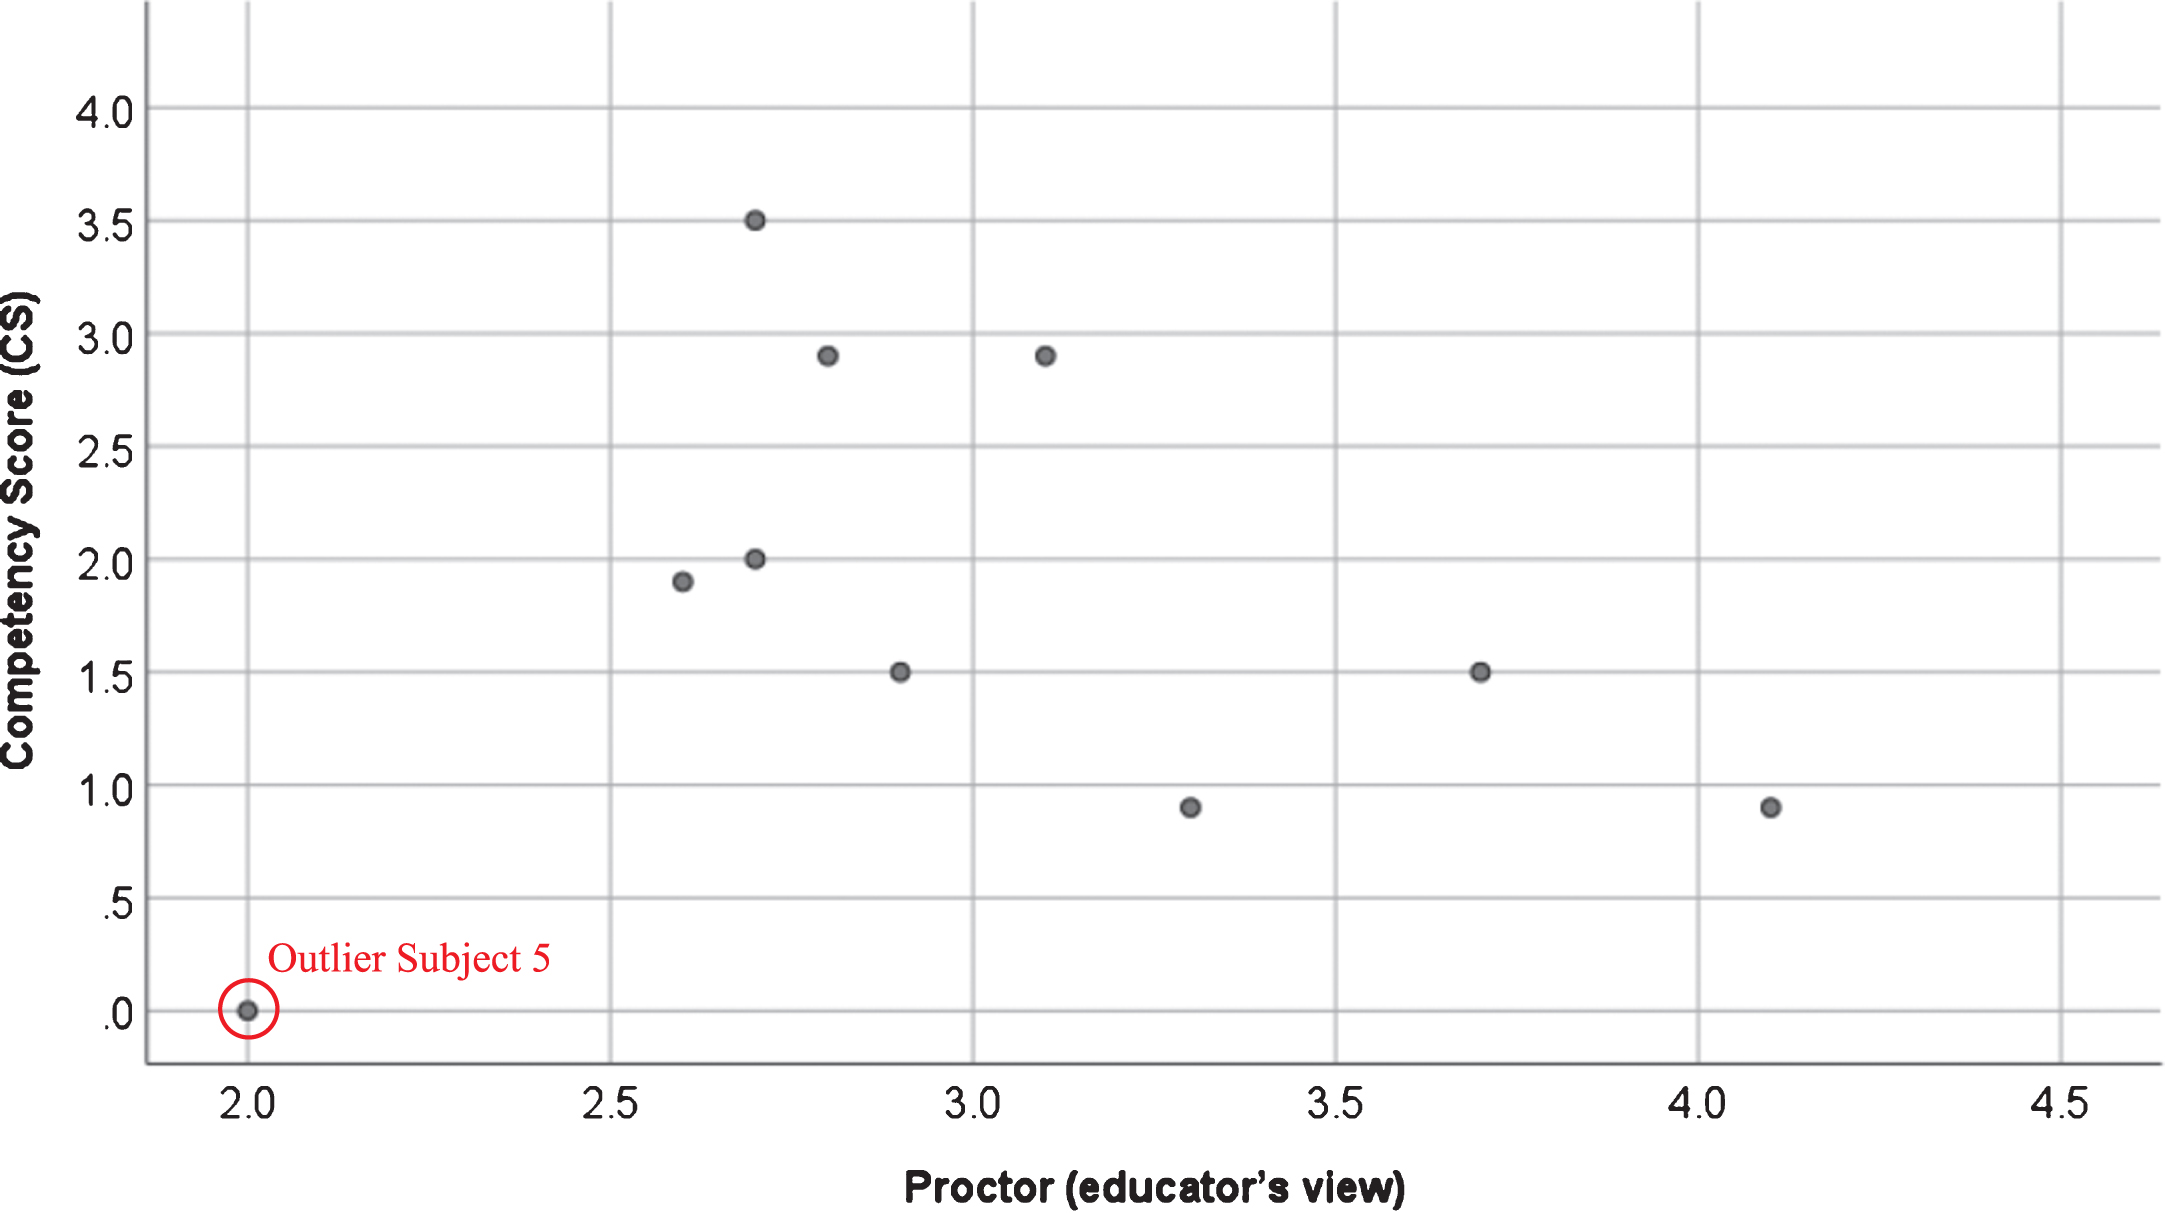 Proctored marks given by breast surgeons on the y-axis and Competence scores (CS) on the x-axis.